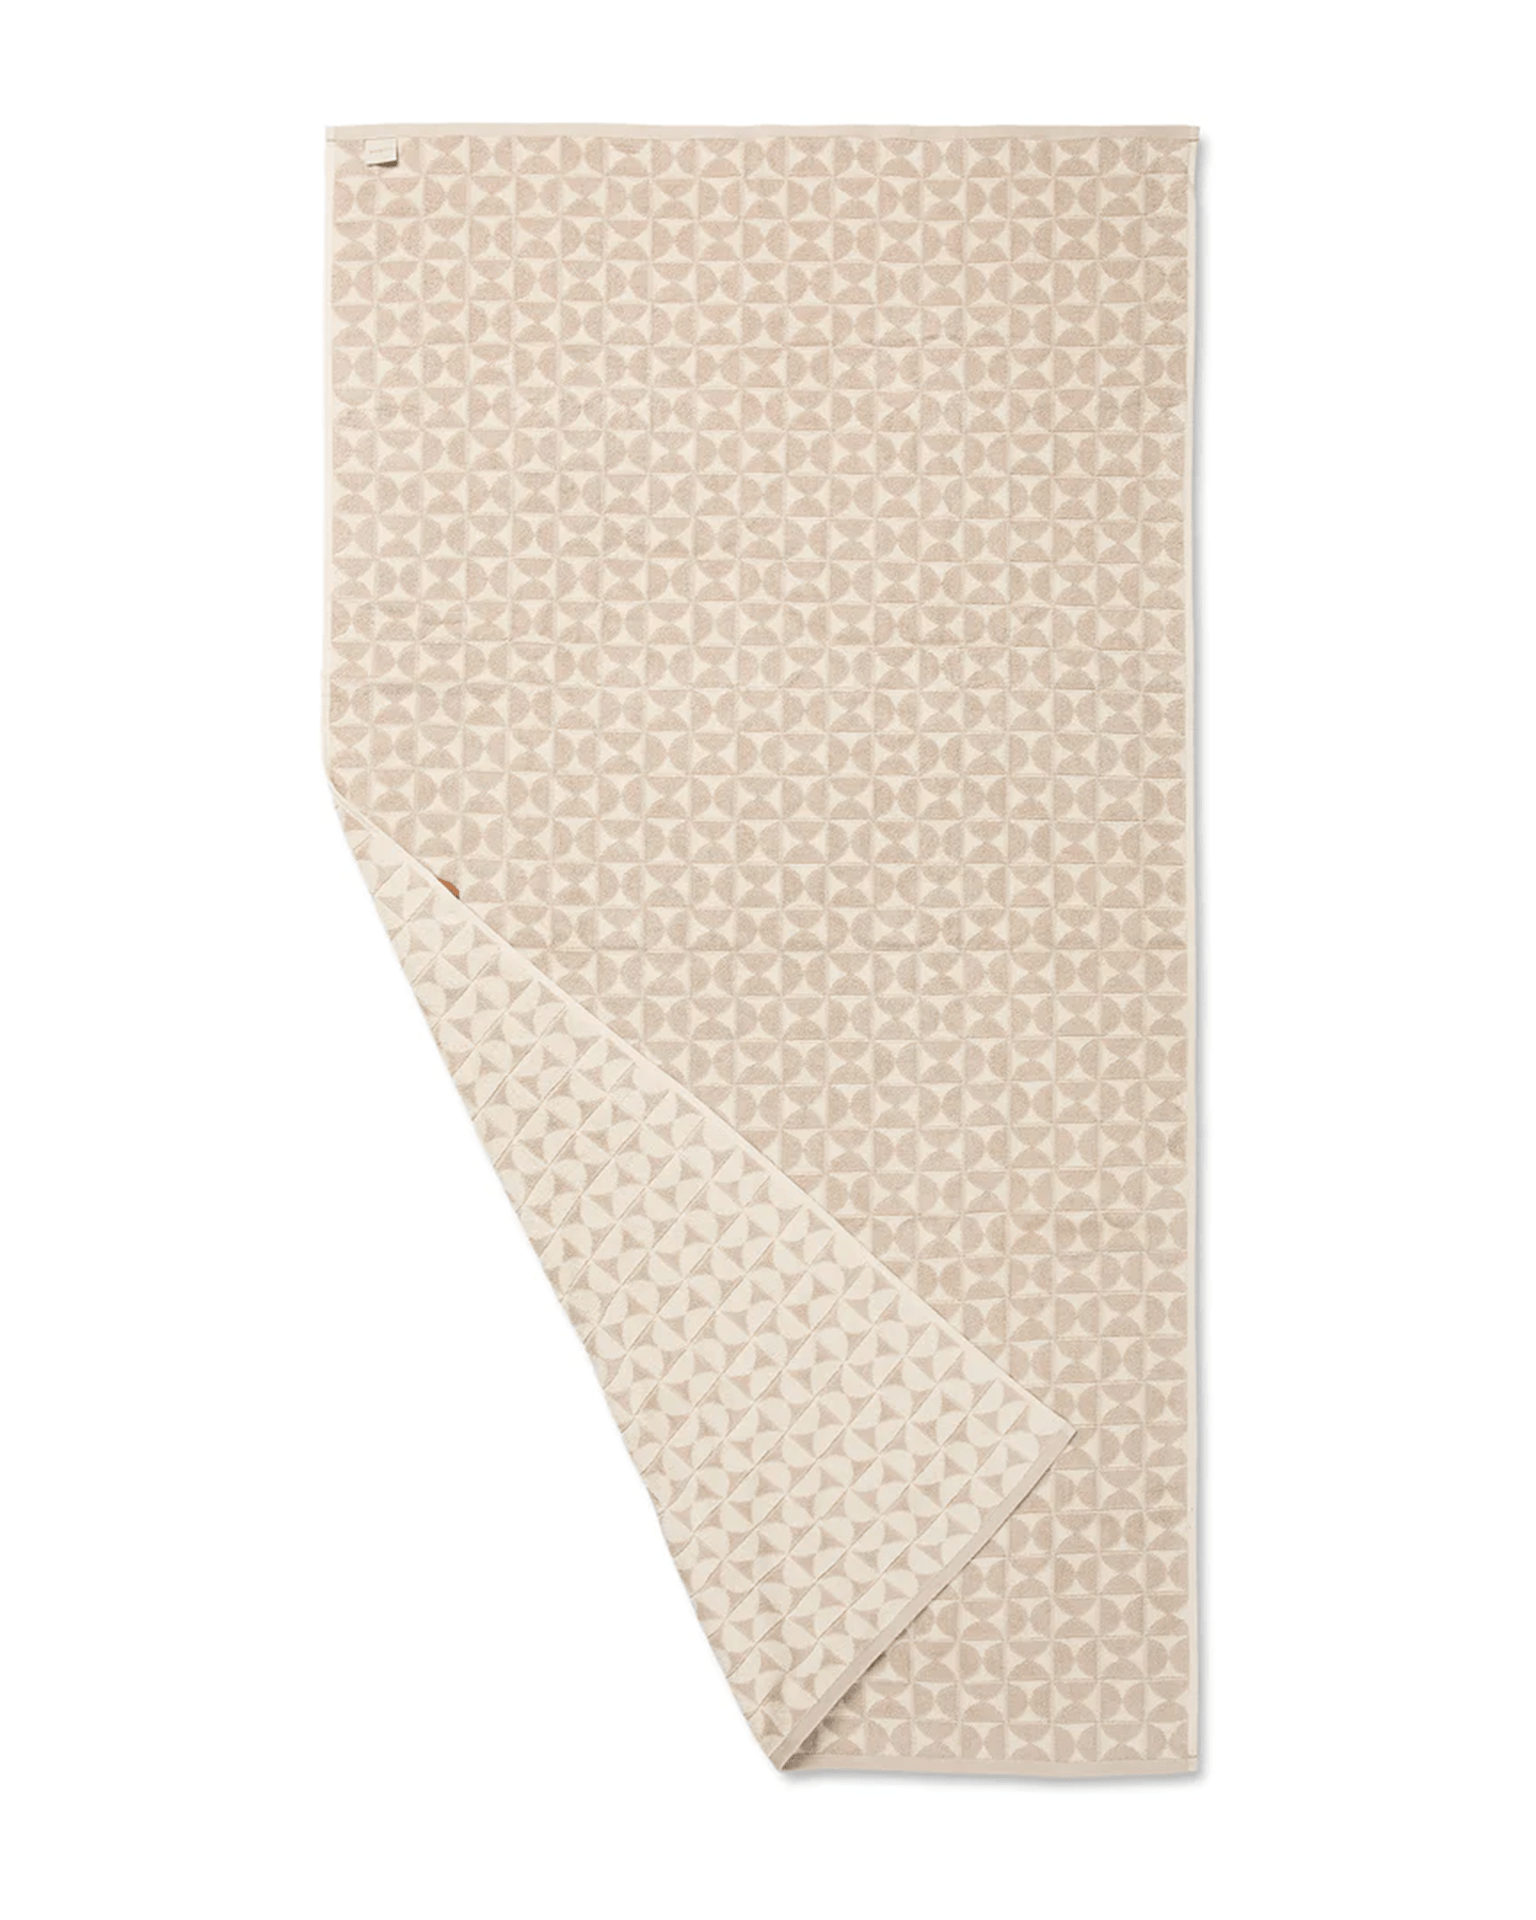 Harper Towel in Toasted Almond